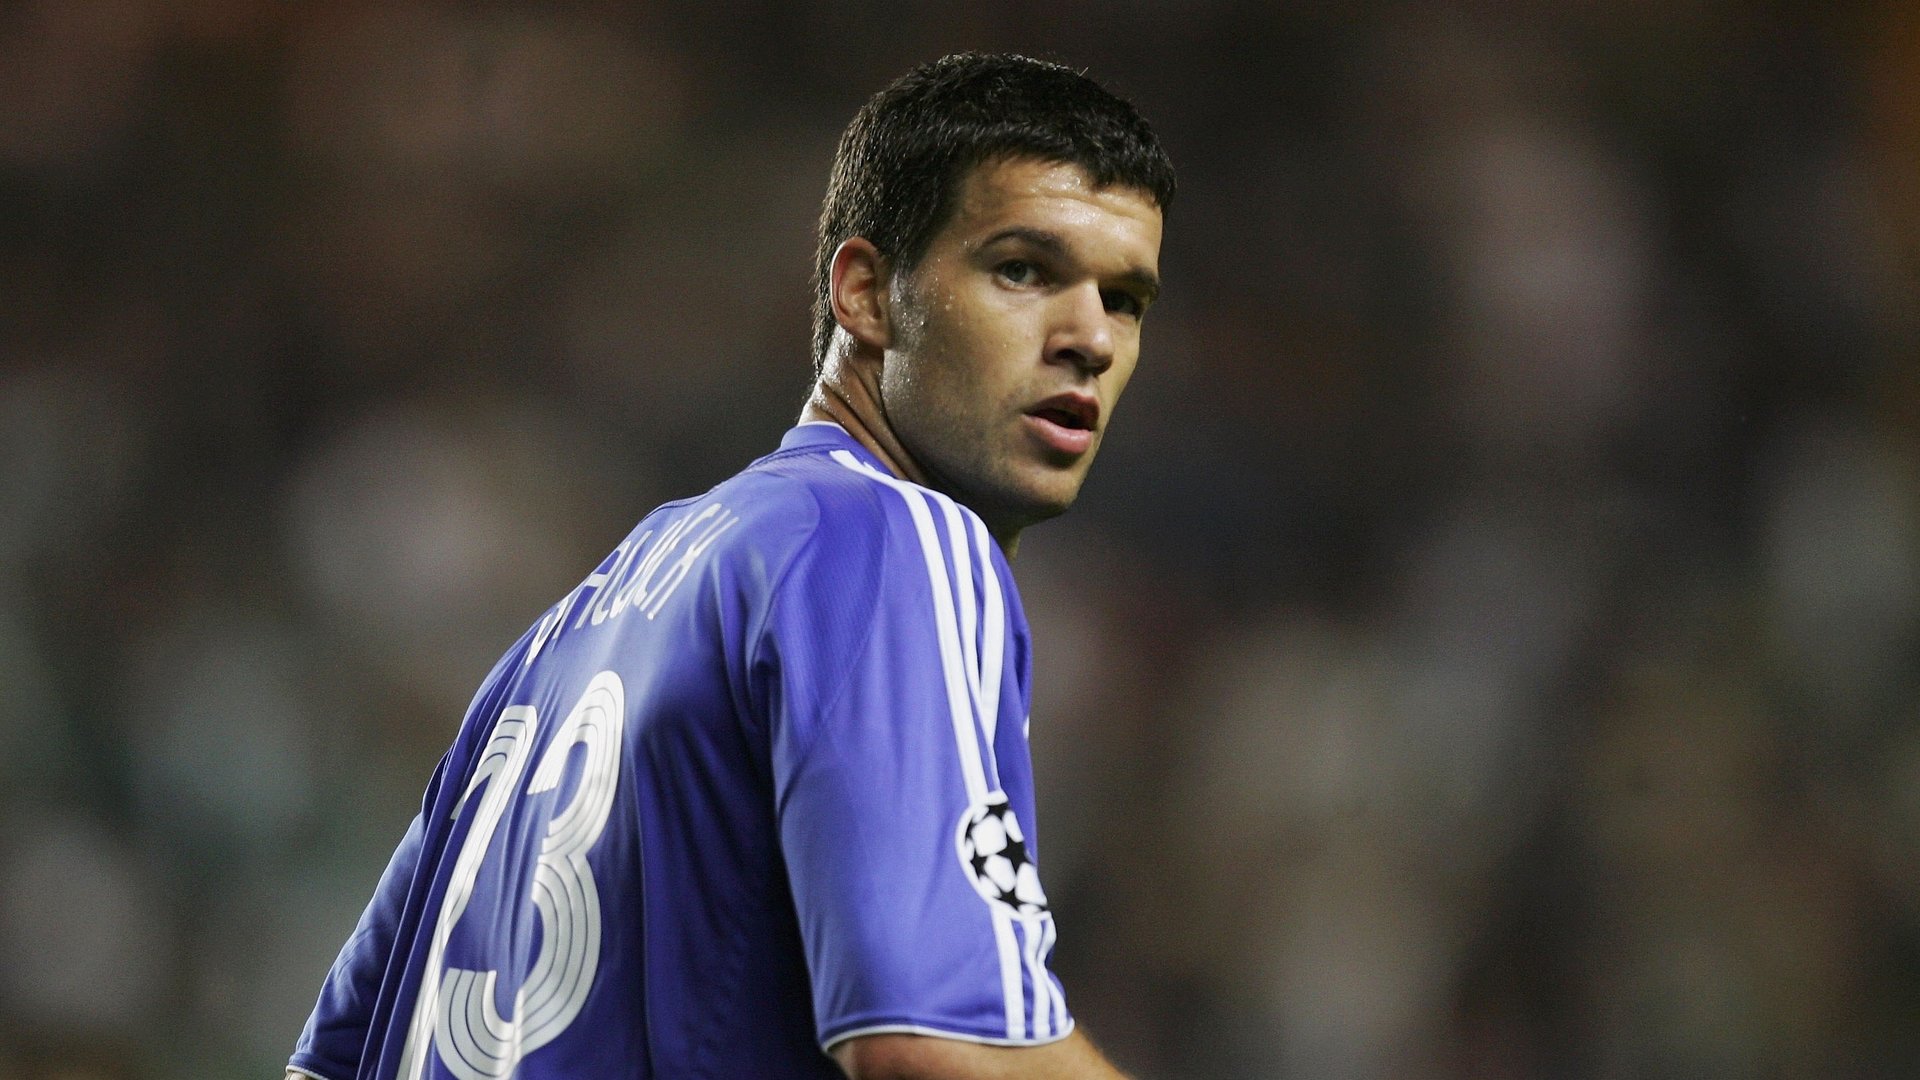 Former Chelsea and Germany midfielder Michael Ballack’s son Emilio dies aged 18